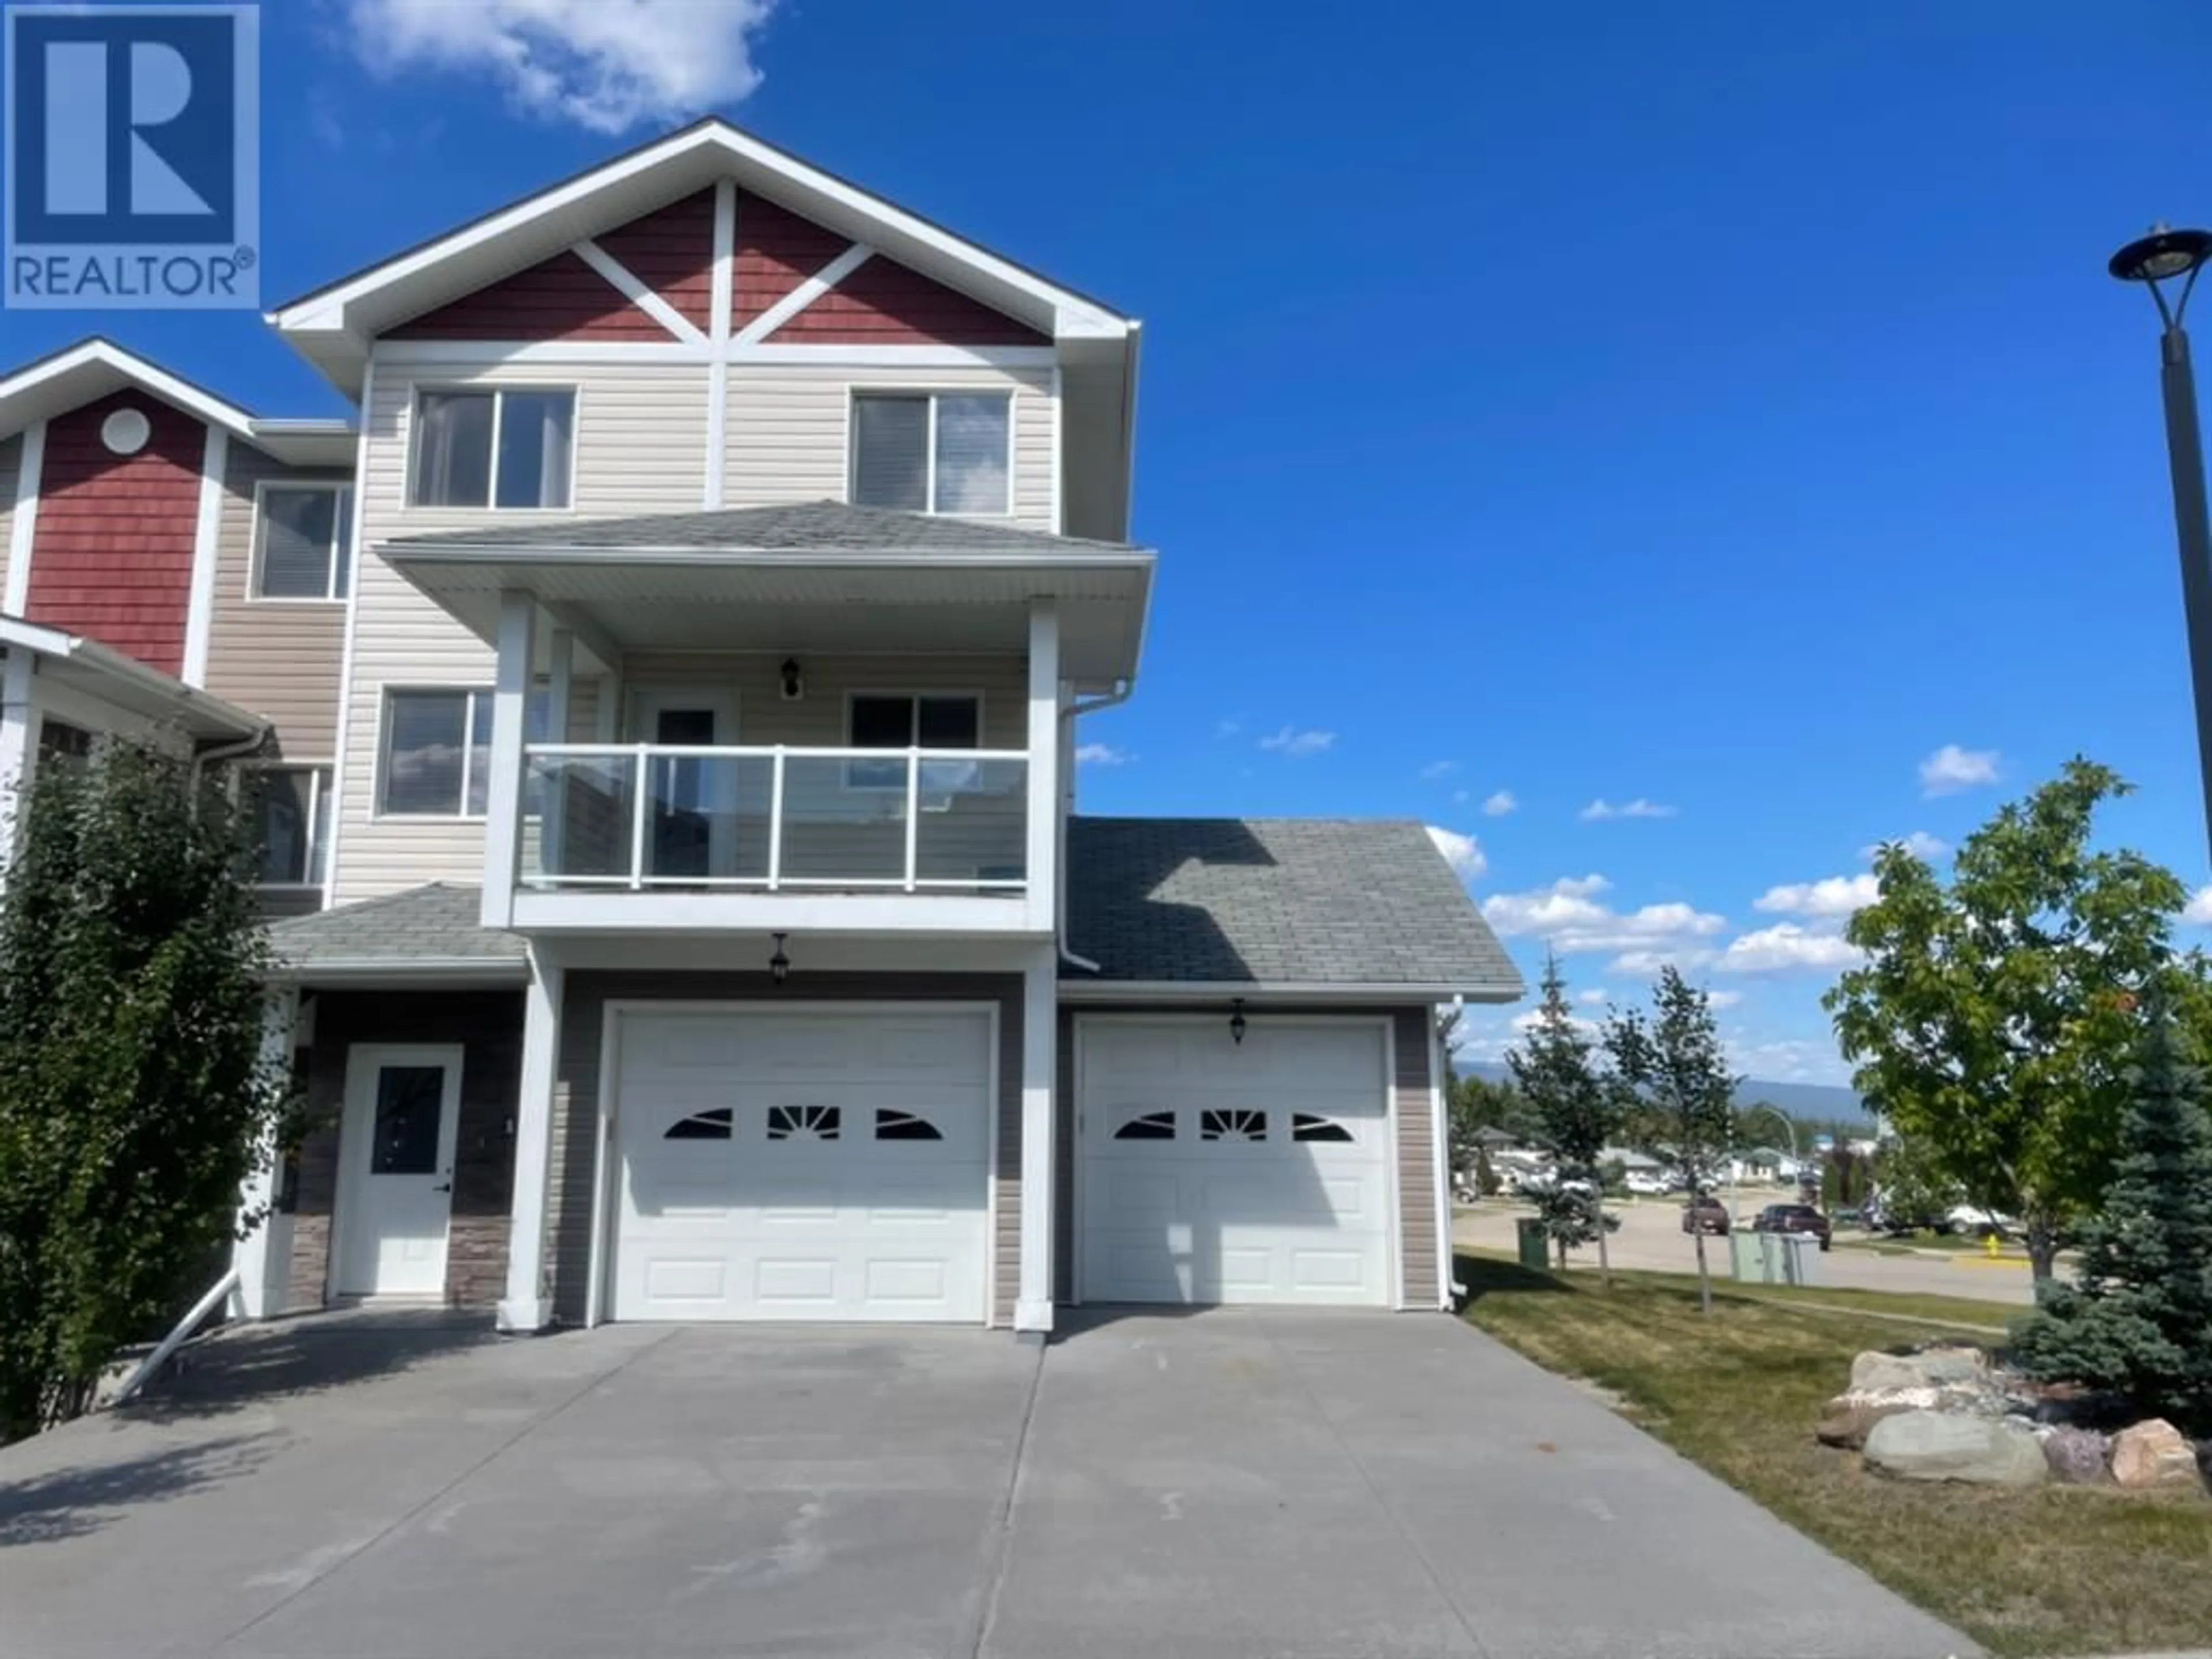 Home with stucco exterior material for 1 214 MCARDELL Drive, Hinton Alberta T7V0A9